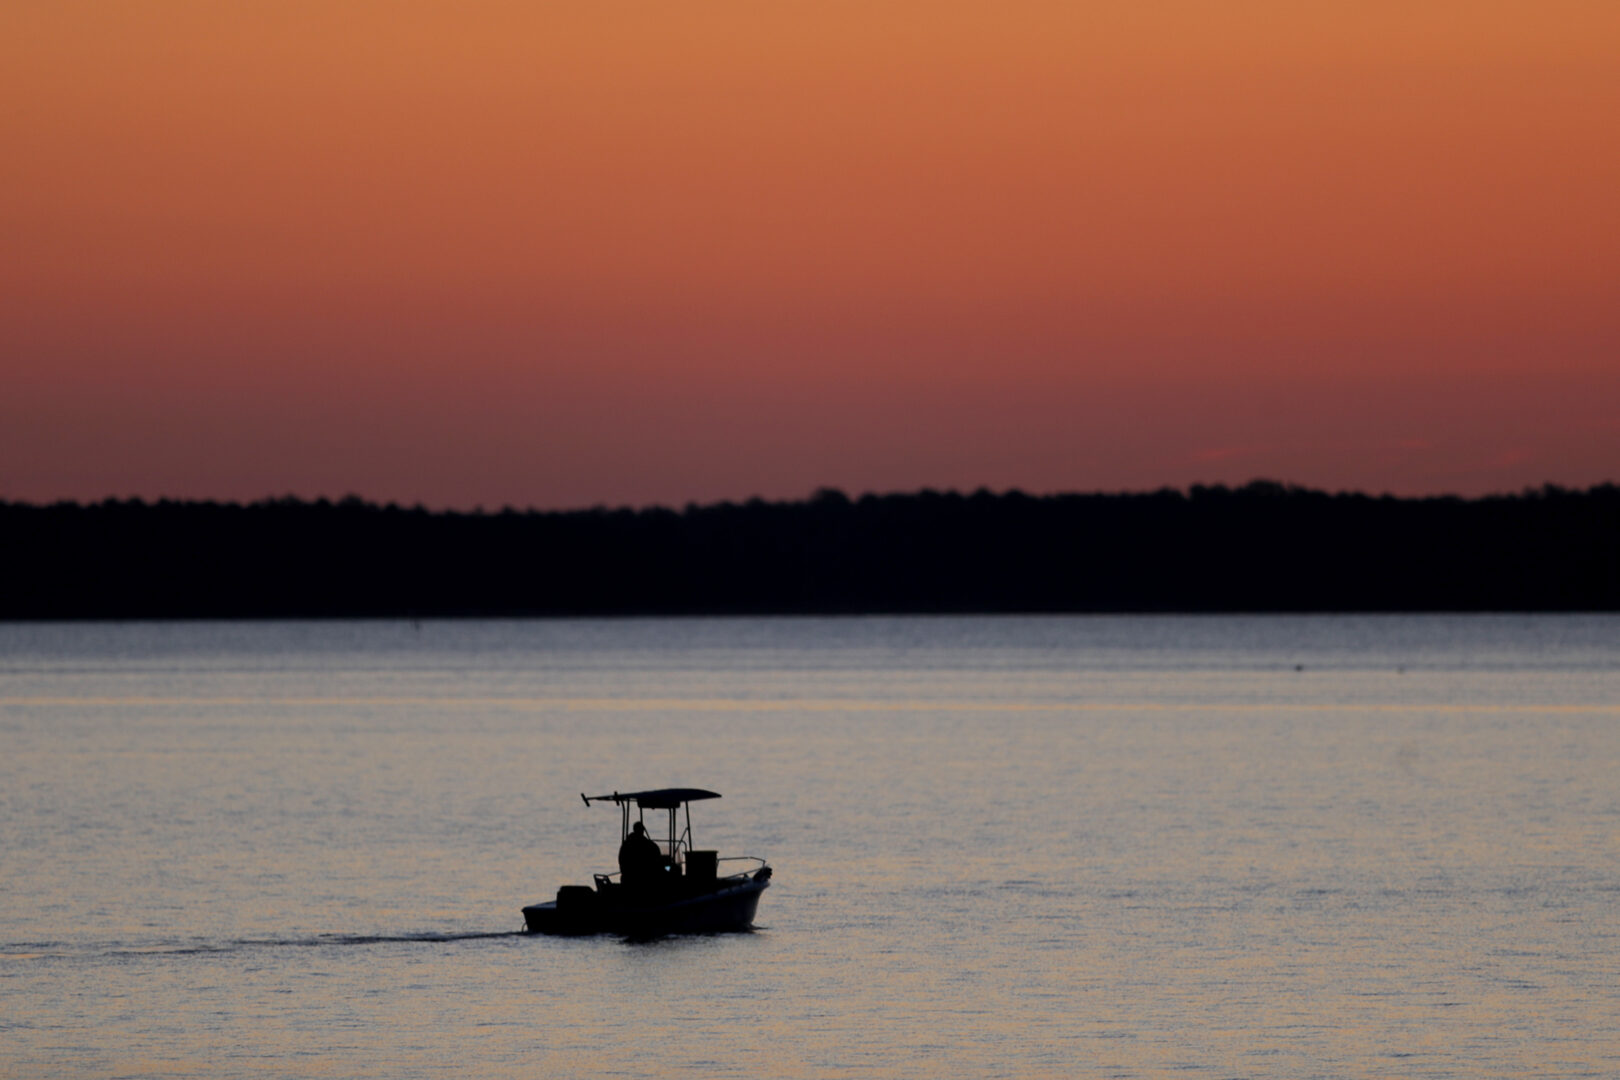 FILE - A small boat travels along the Honga River near the Chesapeake Bay, as the sky lights up at sunrise in Fishing Creek, Md., May 14, 2020. In an evaluation released on Thursday, Jan. 5, 2023, the Chesapeake Bay Foundation, an environmental group, gave the Chesapeake Bay watershed a D-plus grade, the same grade it gave the watershed in its last report in 2020.